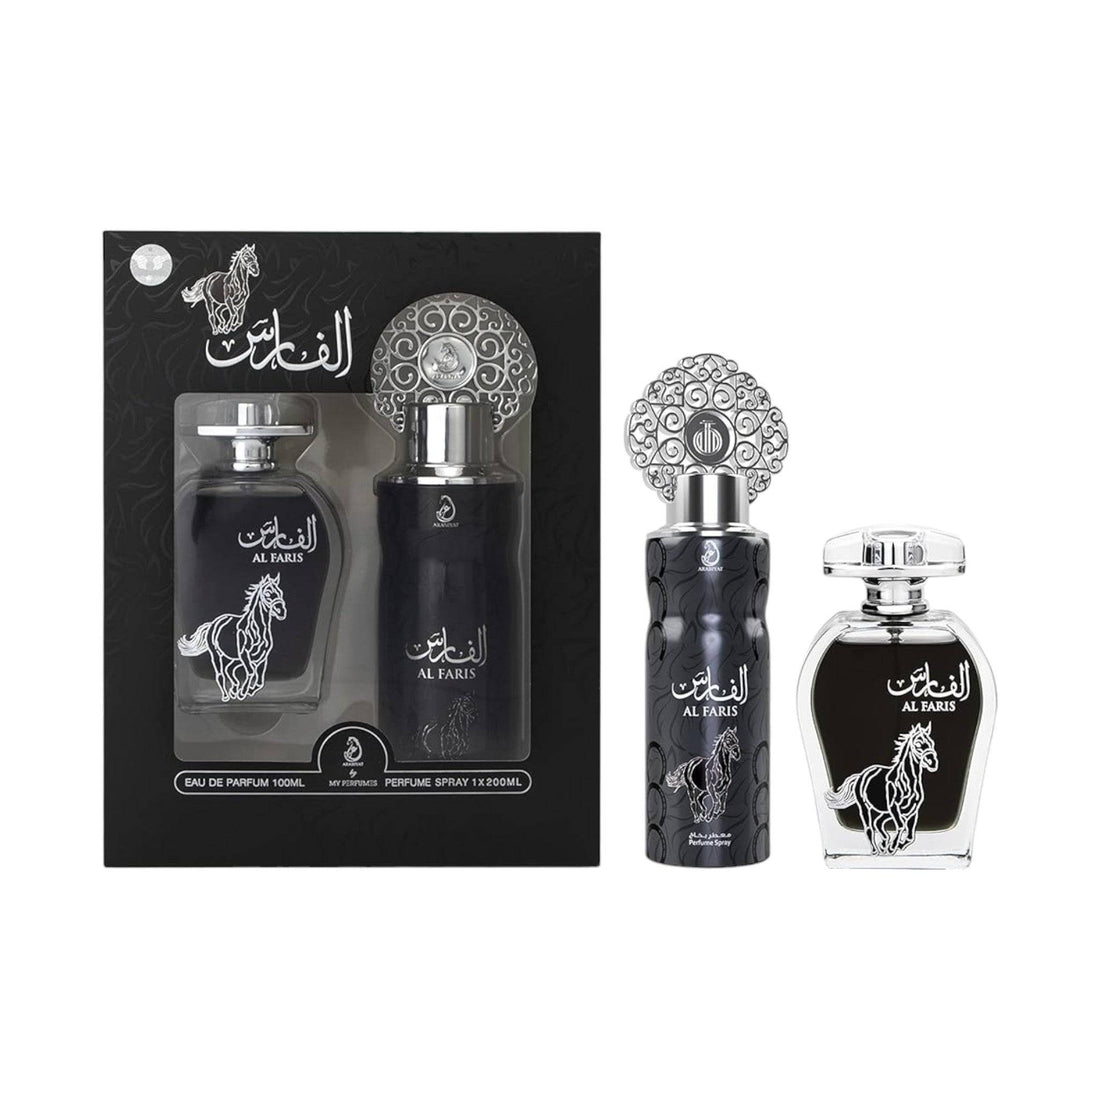 Al Faris Gift Set by My Perfumes, featuring the luxurious Eau De Parfum and Perfume Spray.